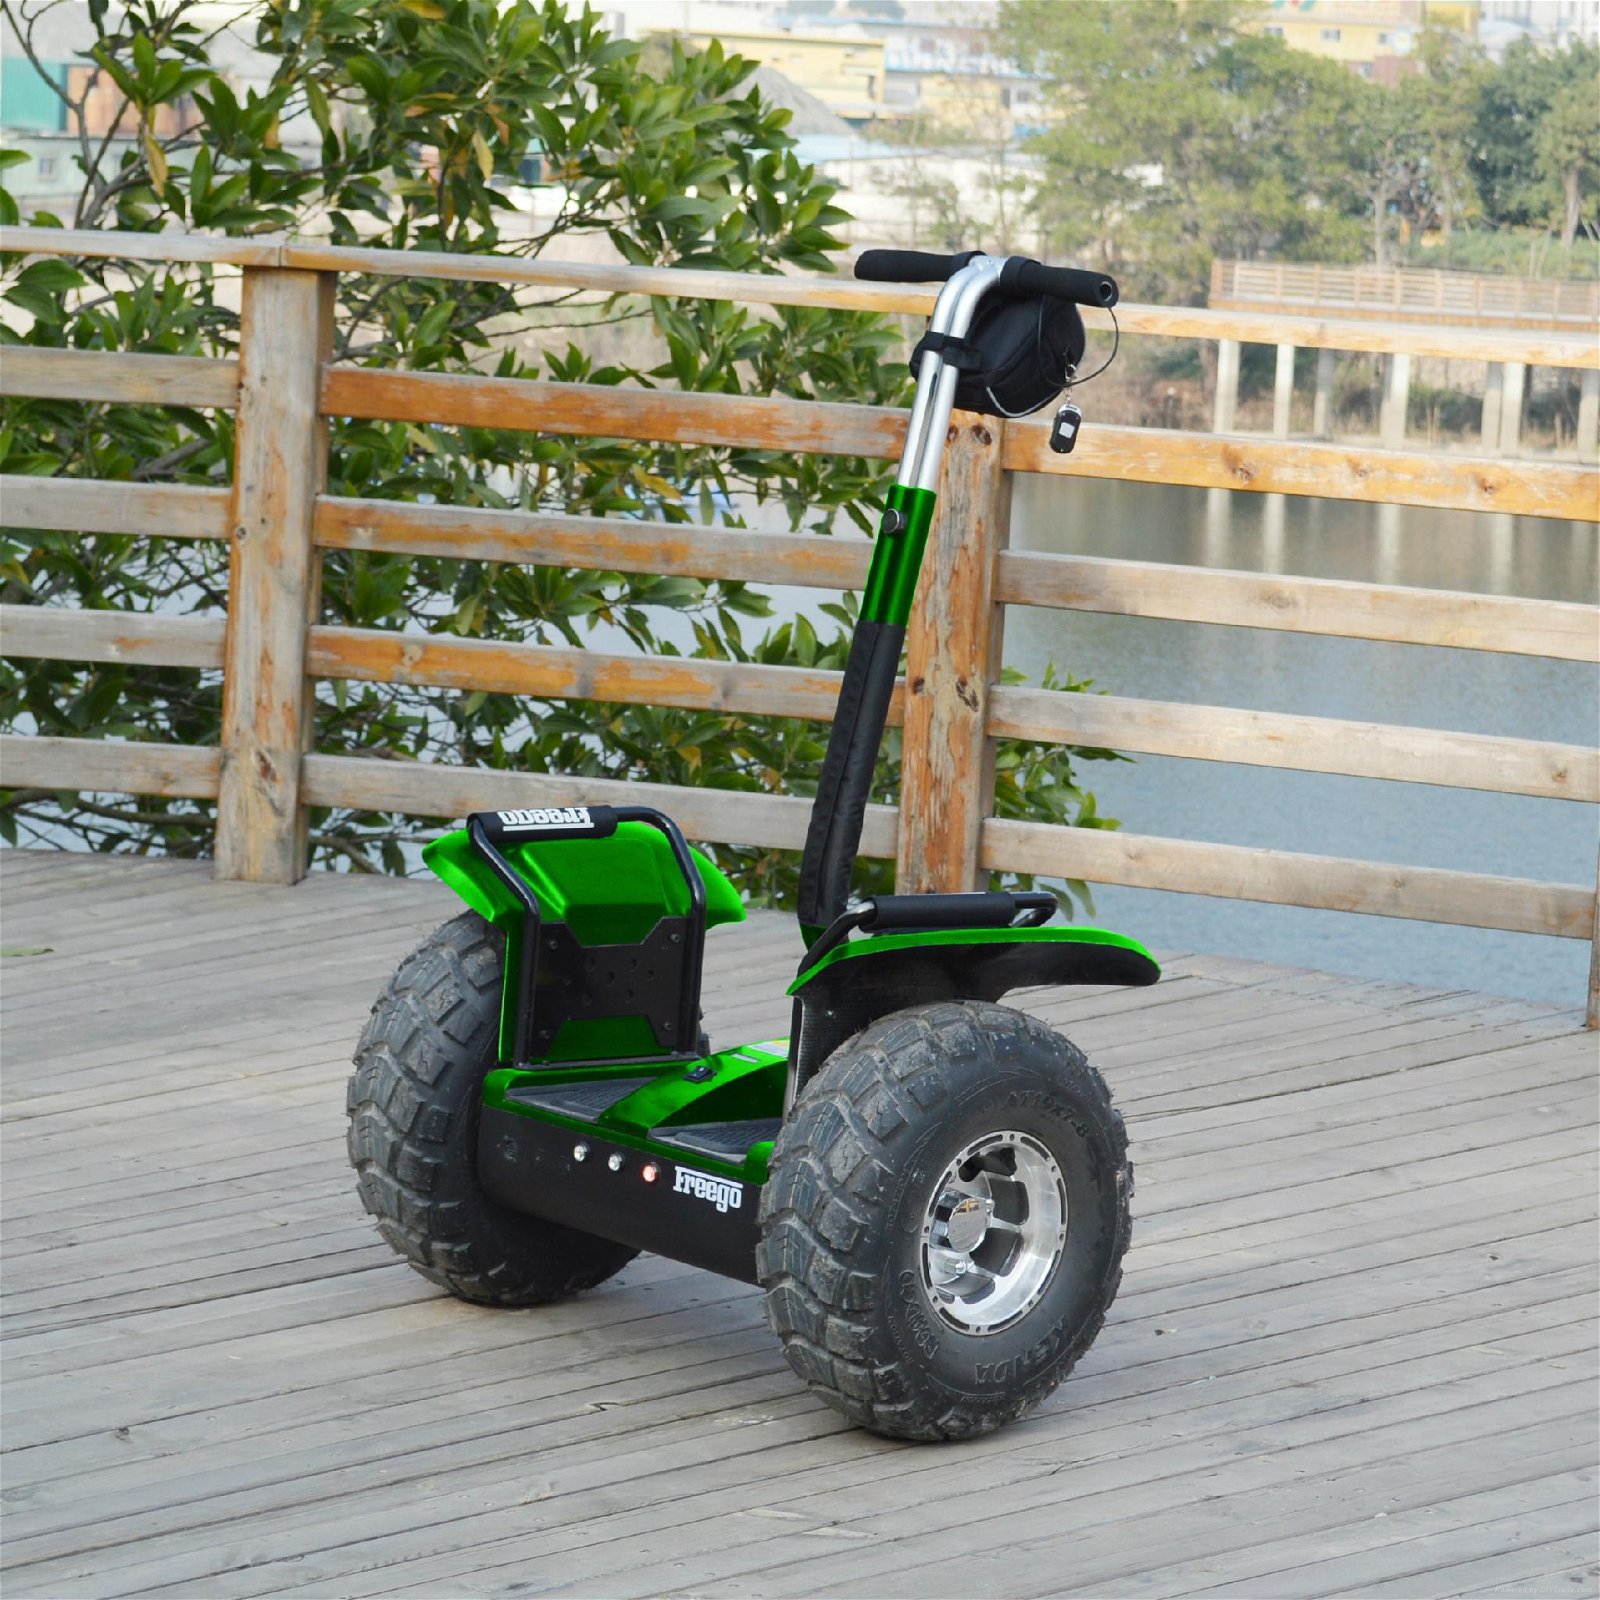 Freego F3 Auto Balancing Electric Chariot, Chinese Segway for Sale - FREEGO  (China Manufacturer) - Golf Cart - Scooters Products - DIYTrade